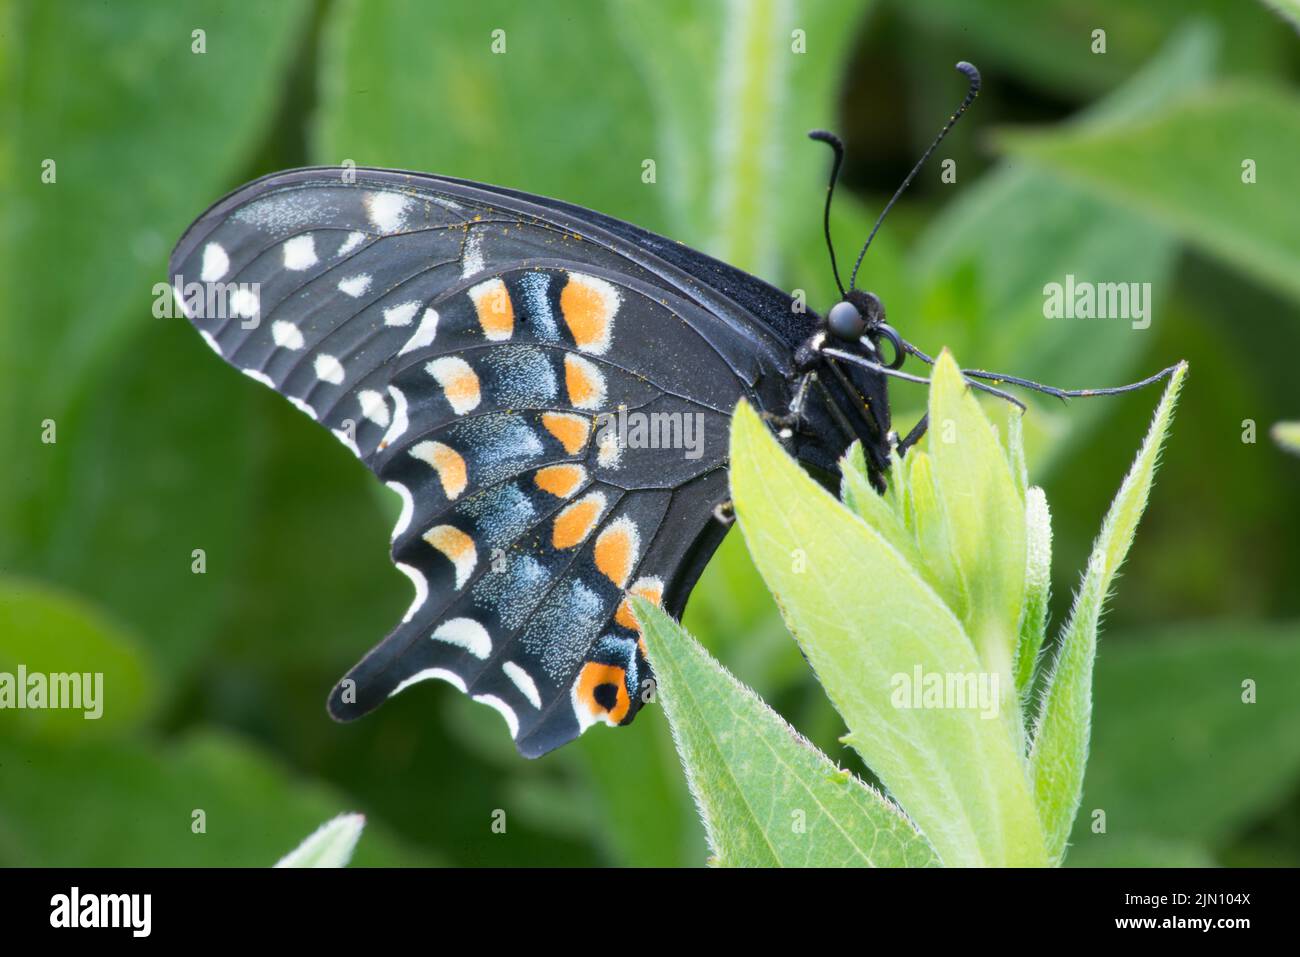 A Spicebush Swallowtail butterfly takes a break from nectar collecting on a Black-Eyed Susan wildflower in my backyard. Stock Photo